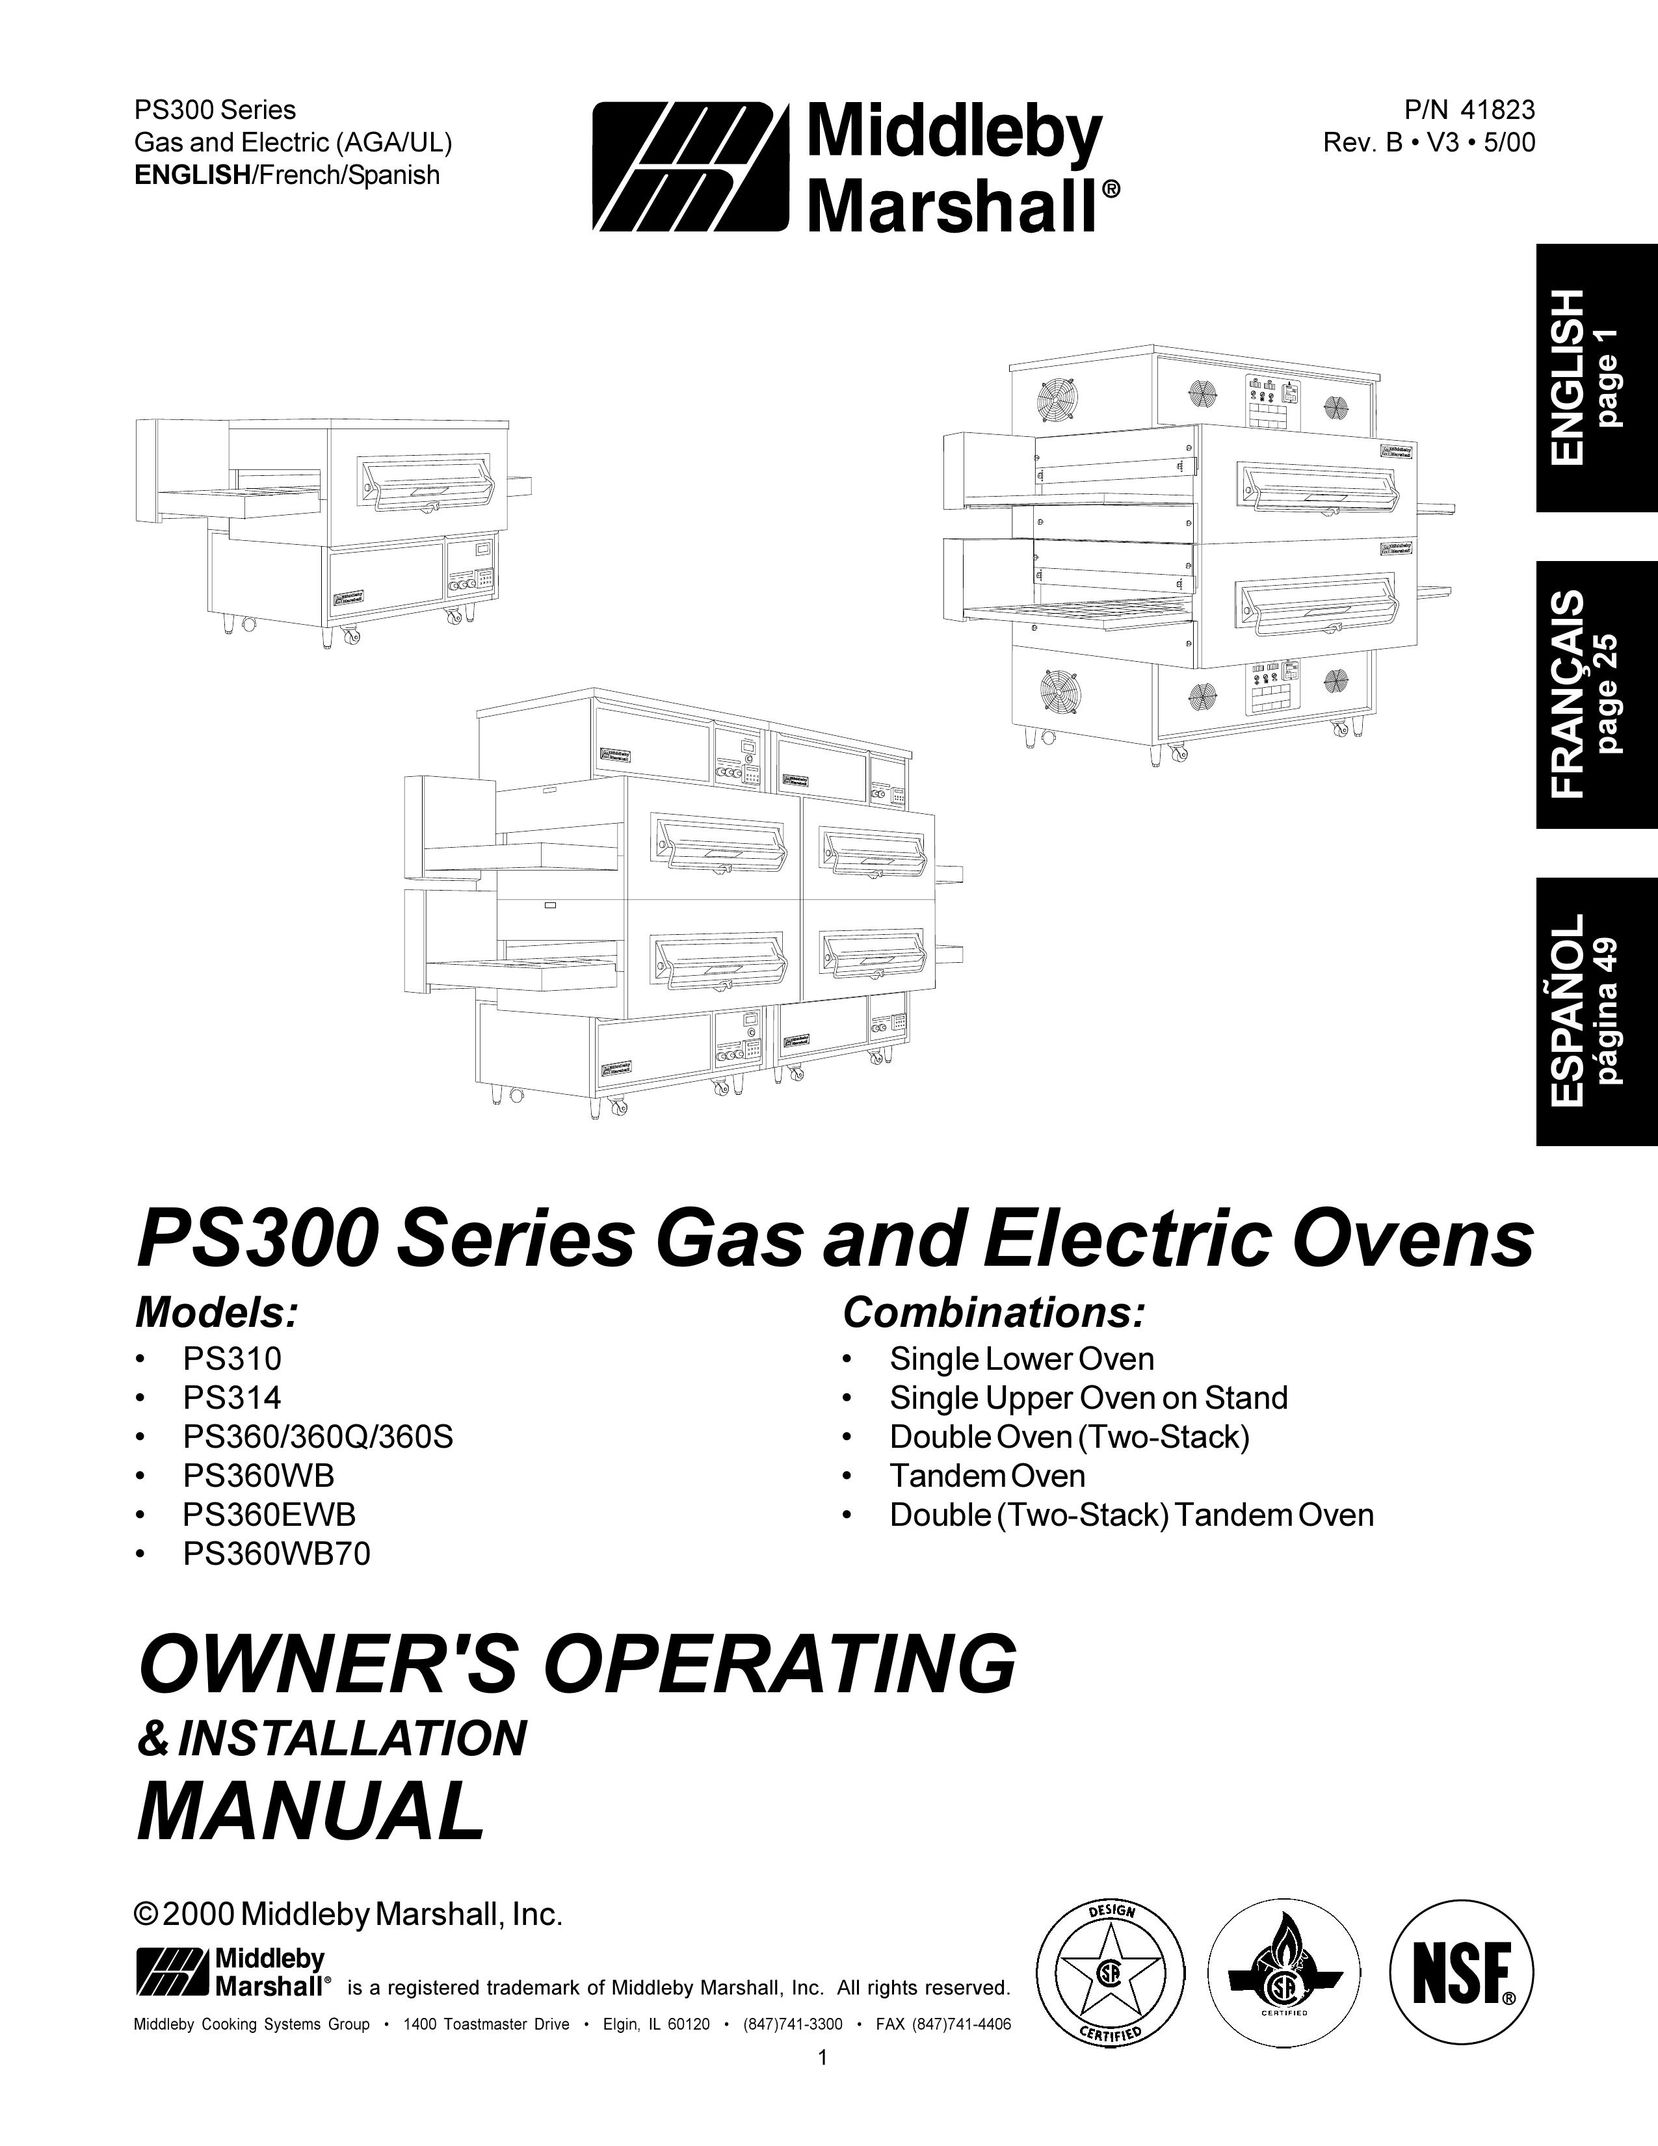 Middleby Marshall PS310 Oven User Manual